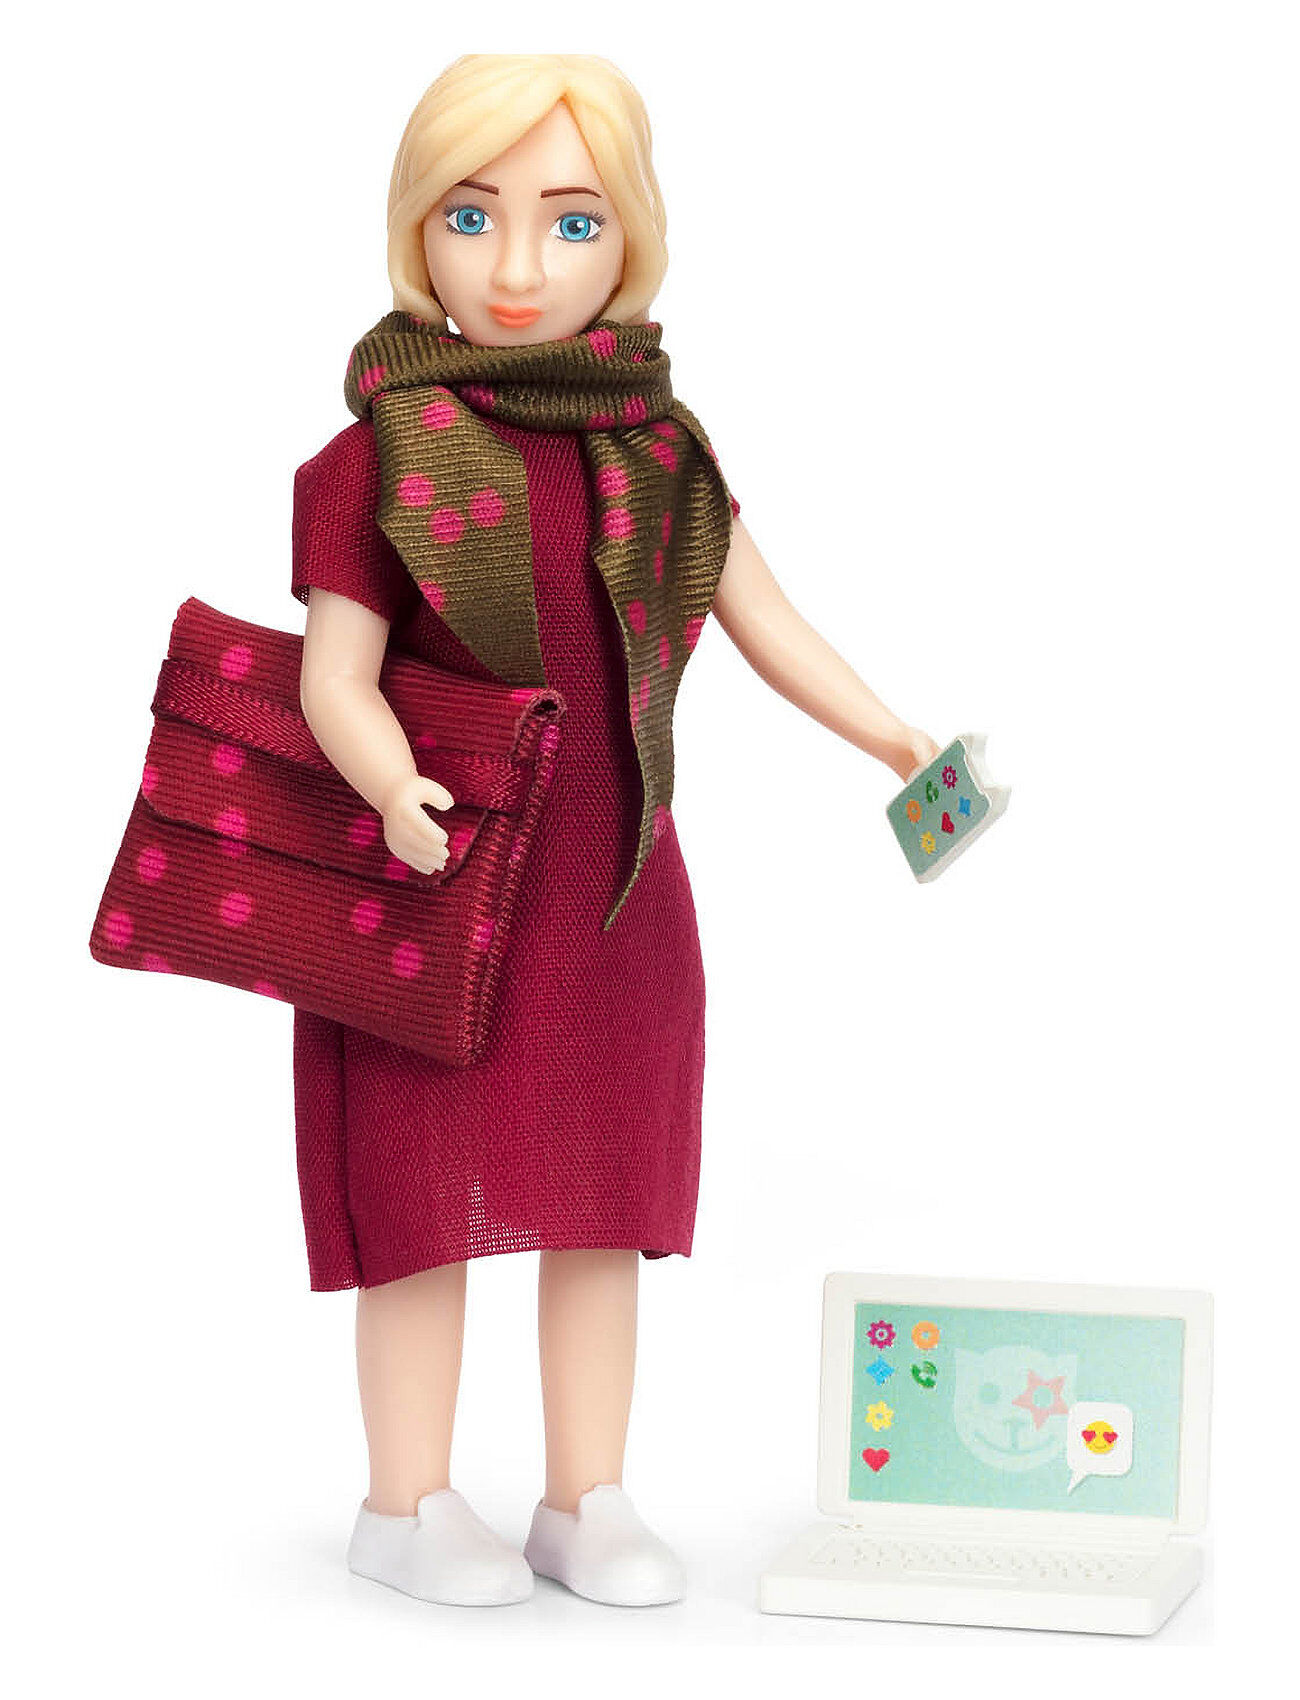 Lundby Docka Med Dator Toys Dolls & Accessories Doll House Accessories Multi/mønstret Lundby